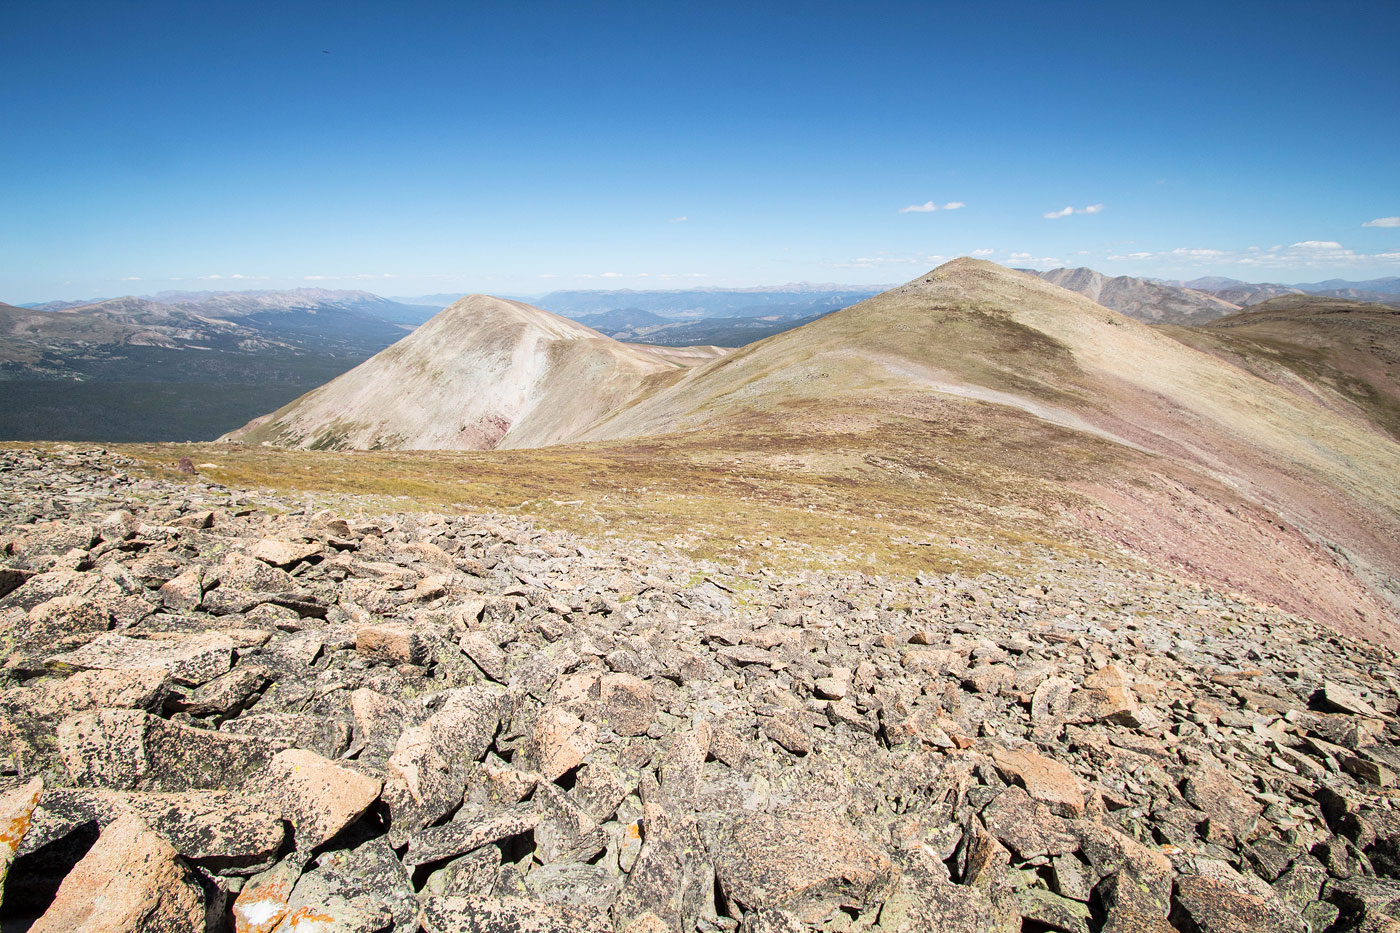 Hike Mount Silverheels, Hoosier Ridge, Red Mountain in Pike and San Isabel National Forest, Colorado - Stav is Lost